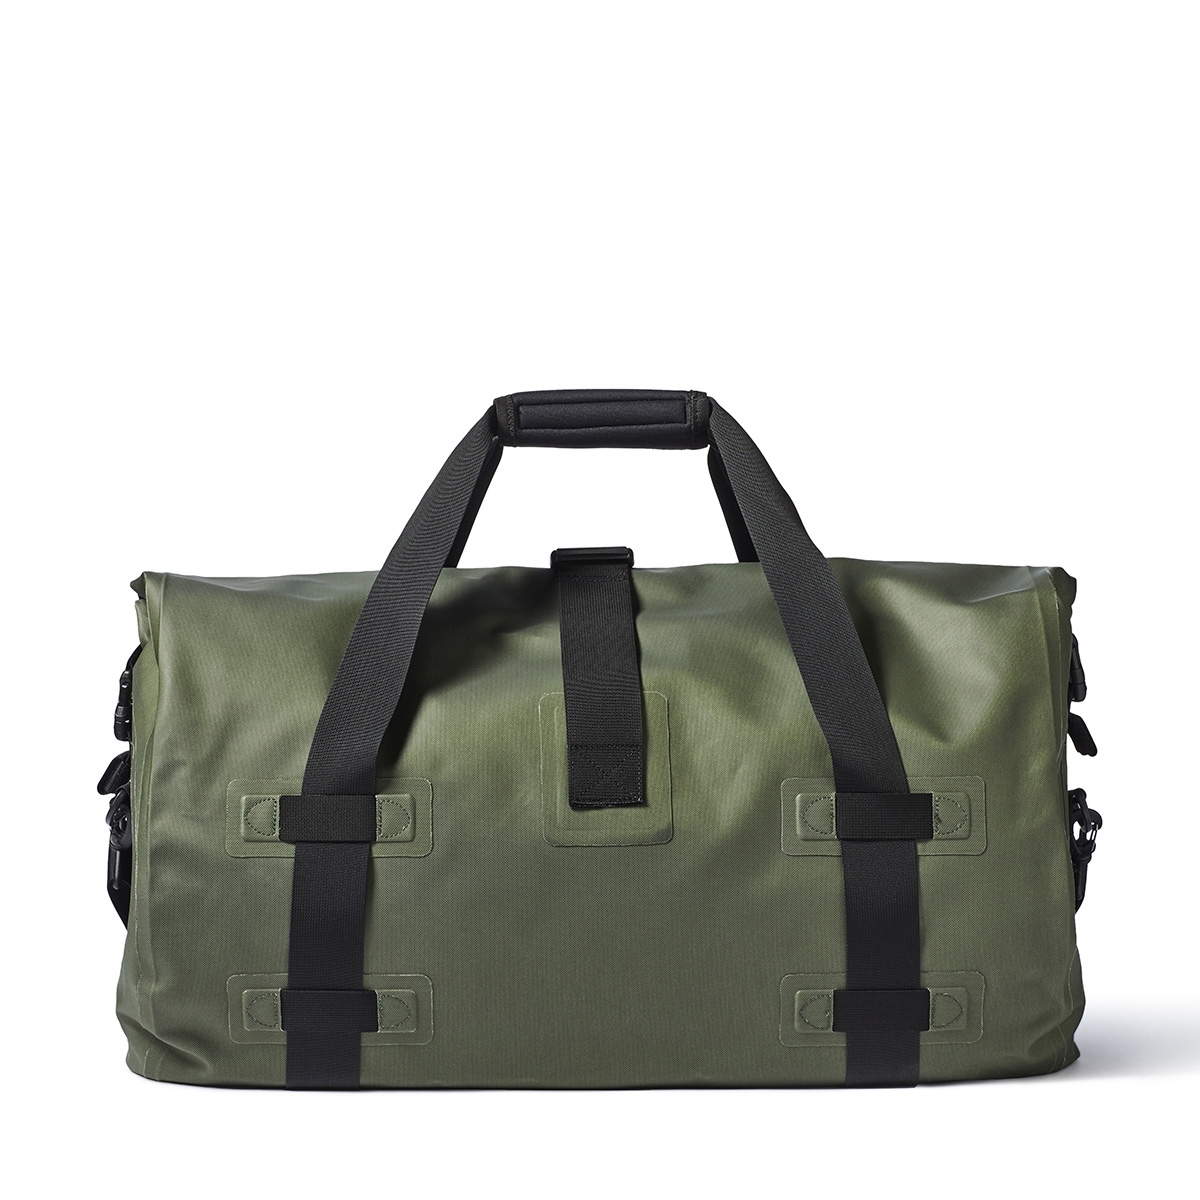 Filson Dry Duffle Bag Medium 20067745-Green, keeps gear dry and protected